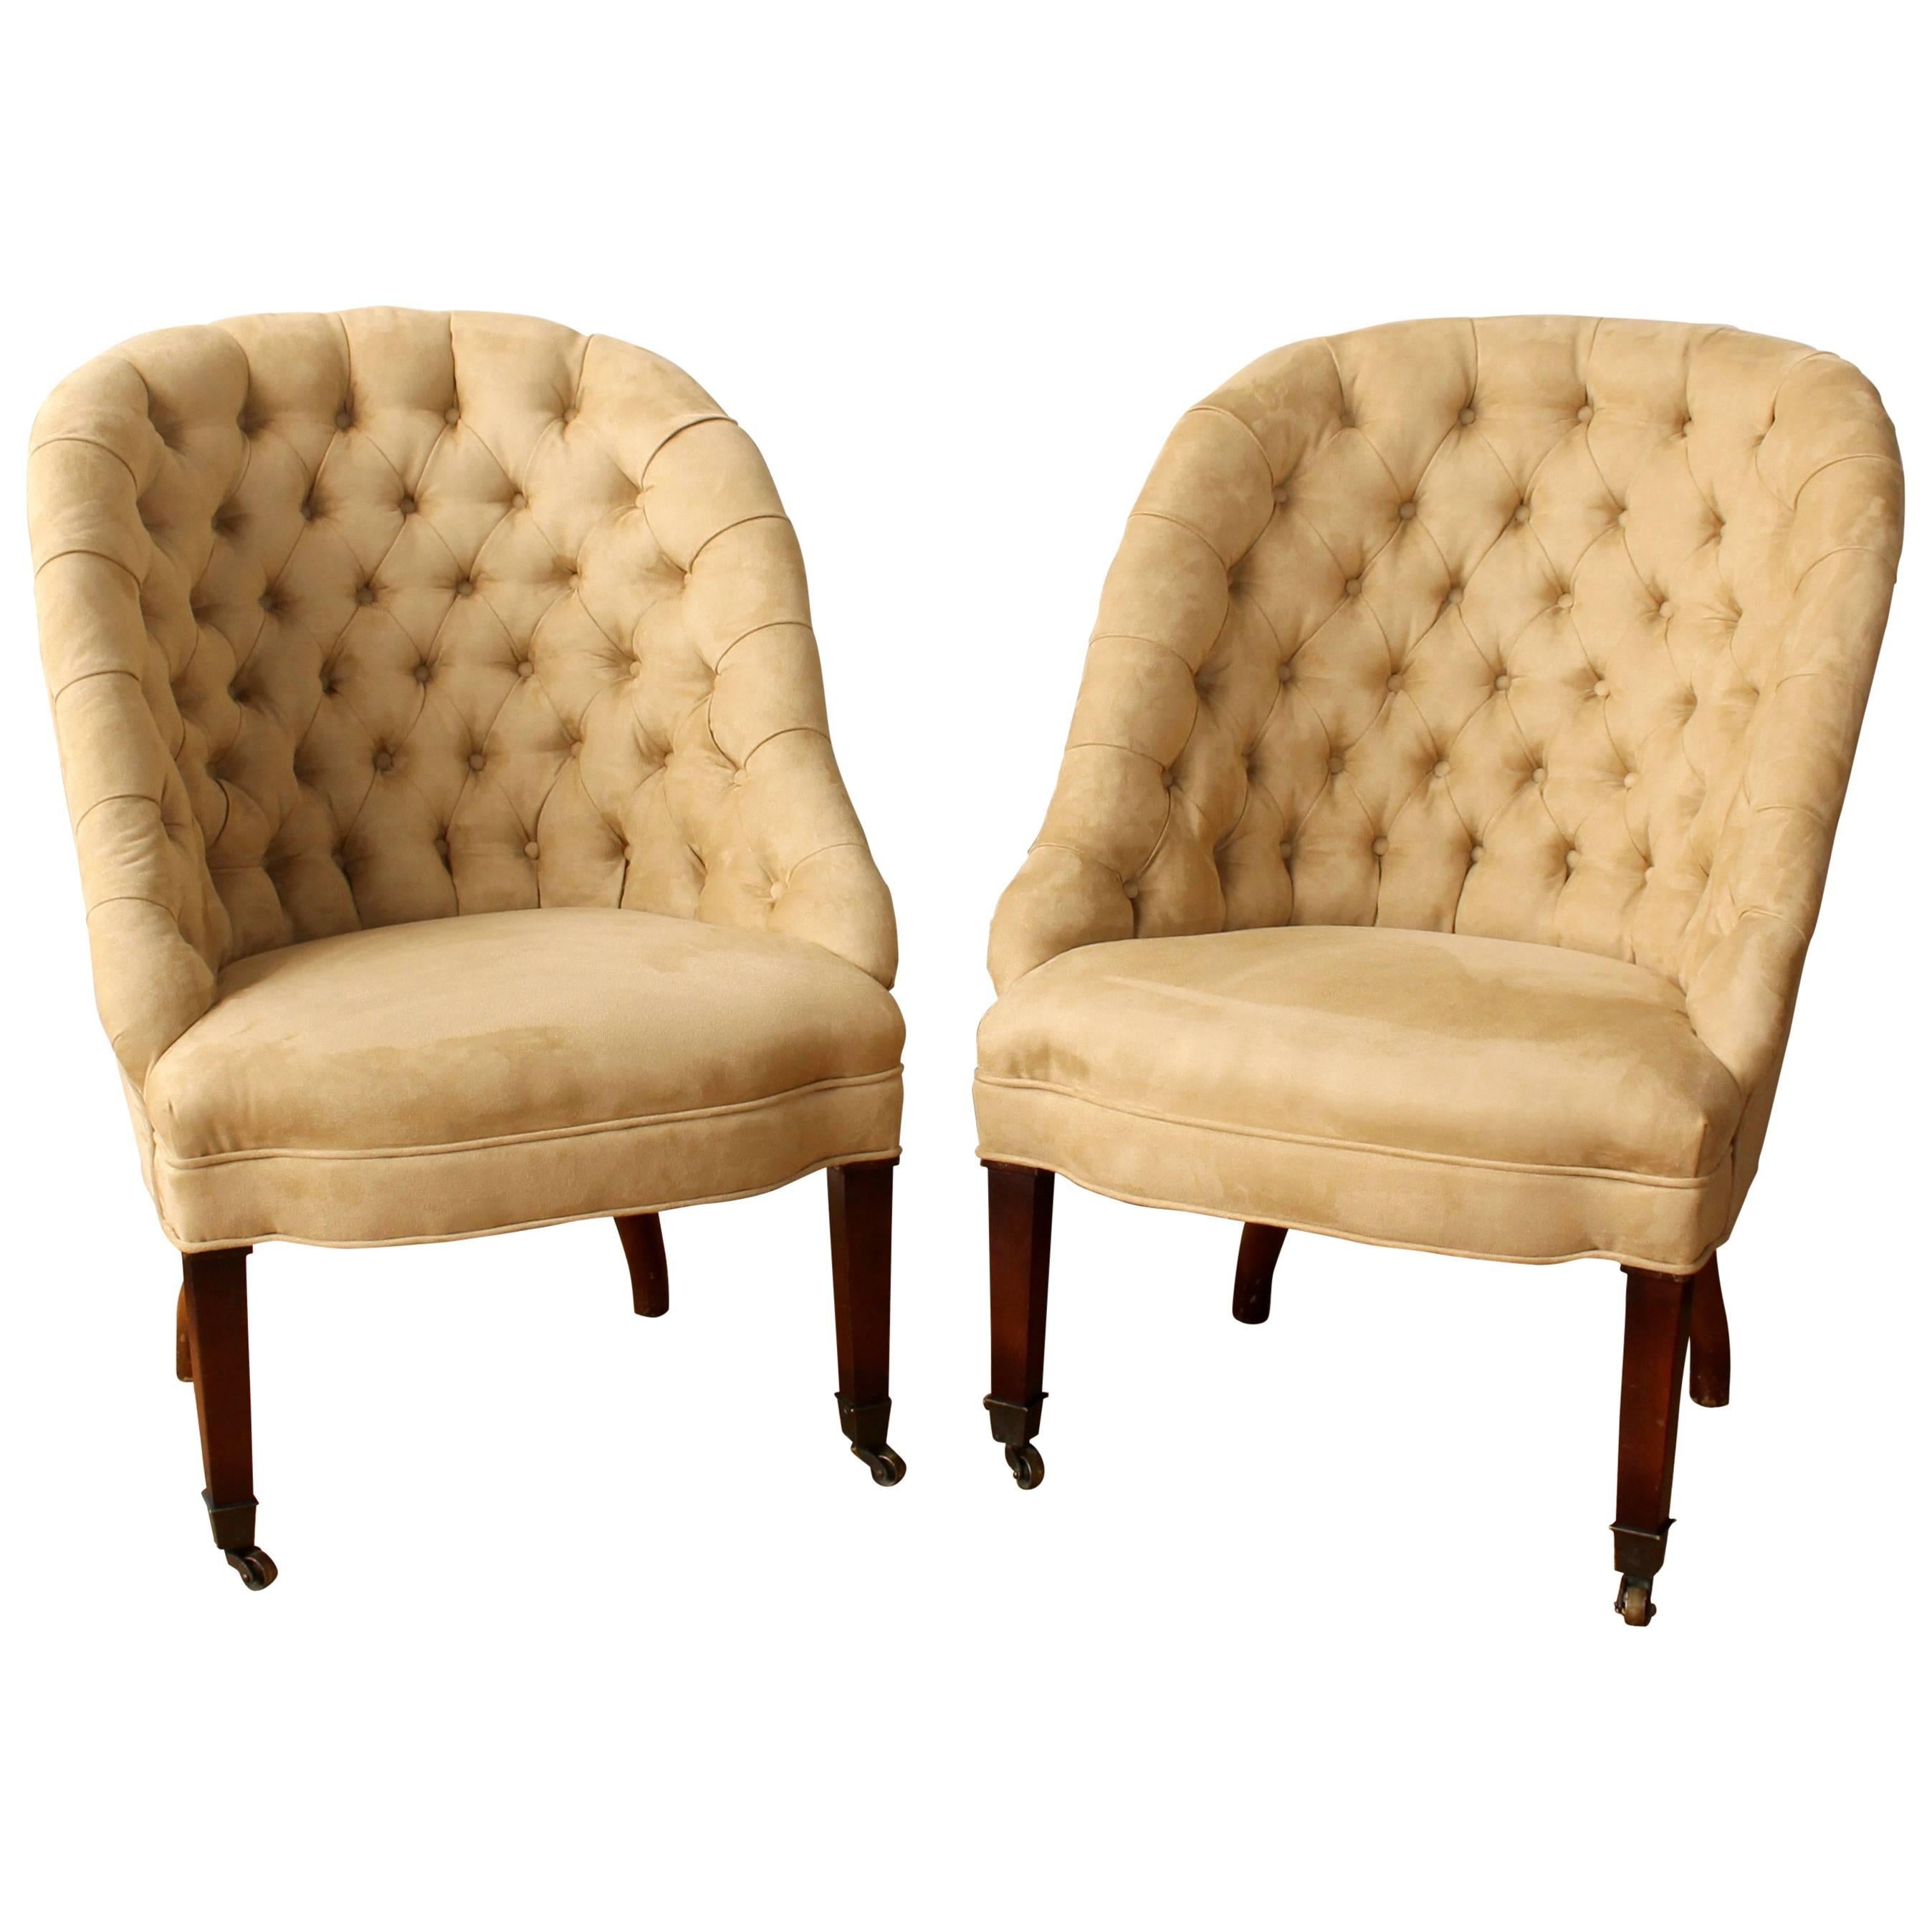 Pair of Buttoned Back Slipper Chairs